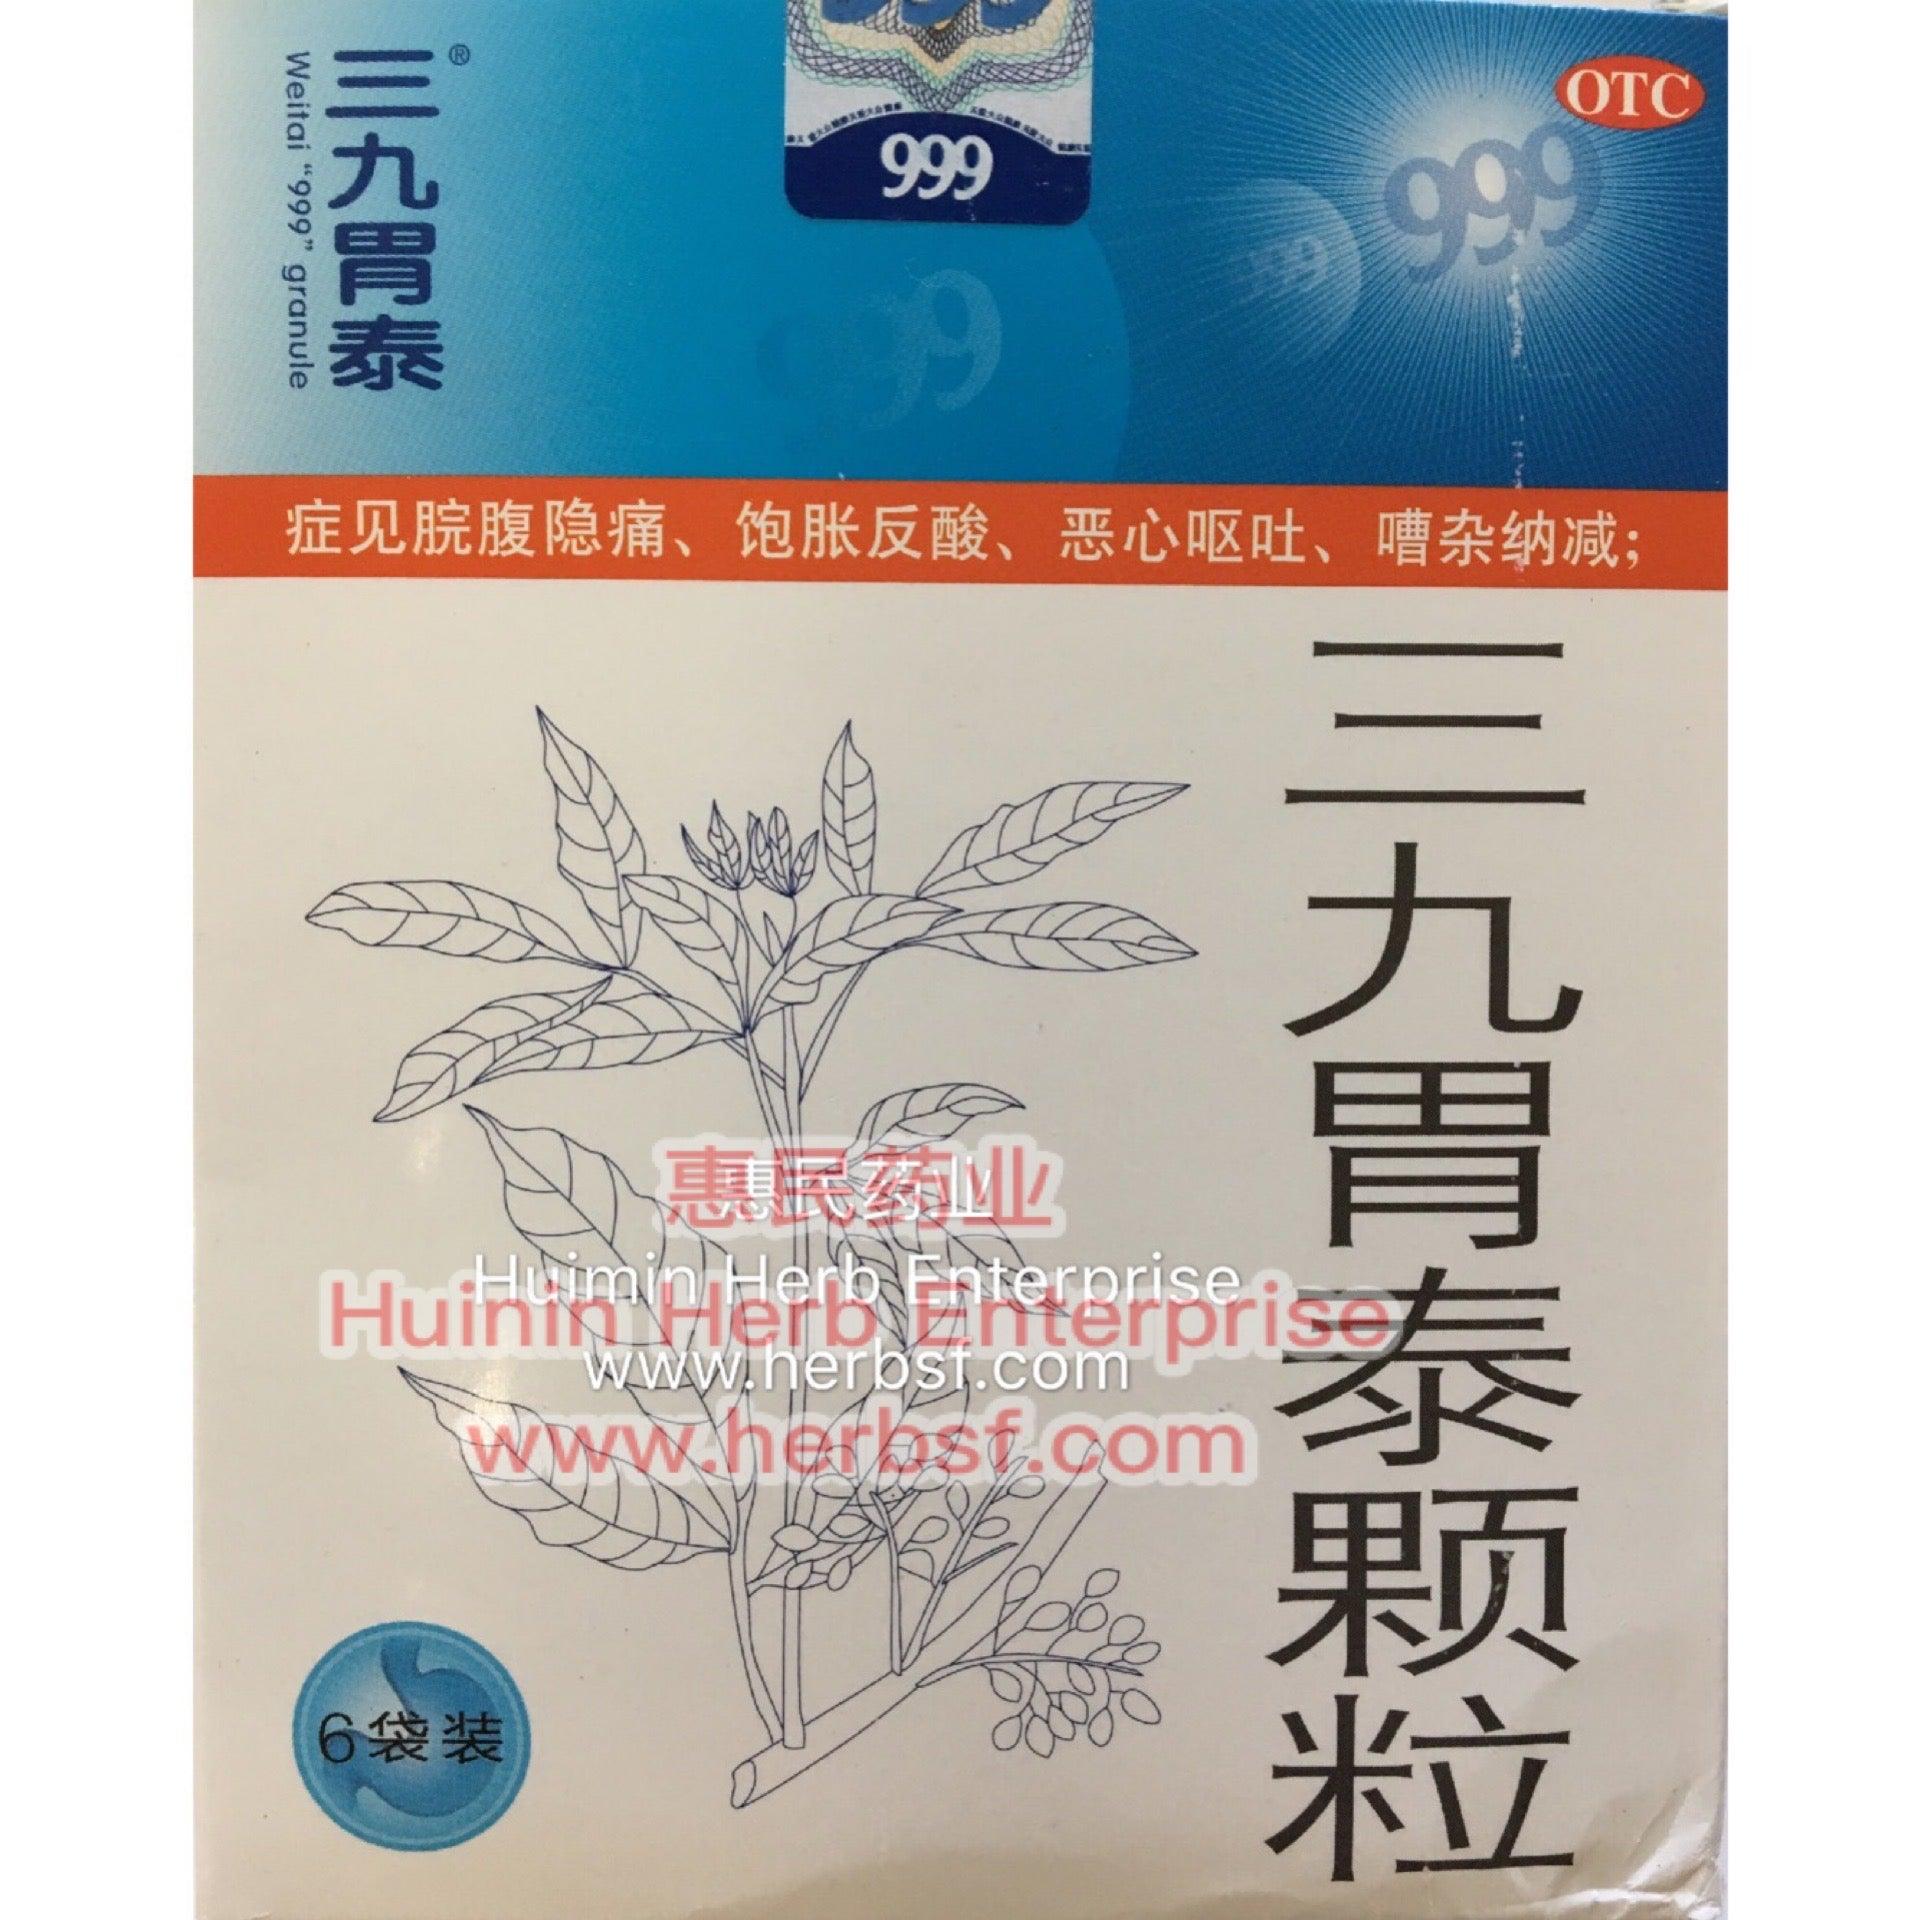 999 Weitai Granules Relieve Stomach Ache Nauseous Bloating - 8 Chinese Herbs - 6 x 20g